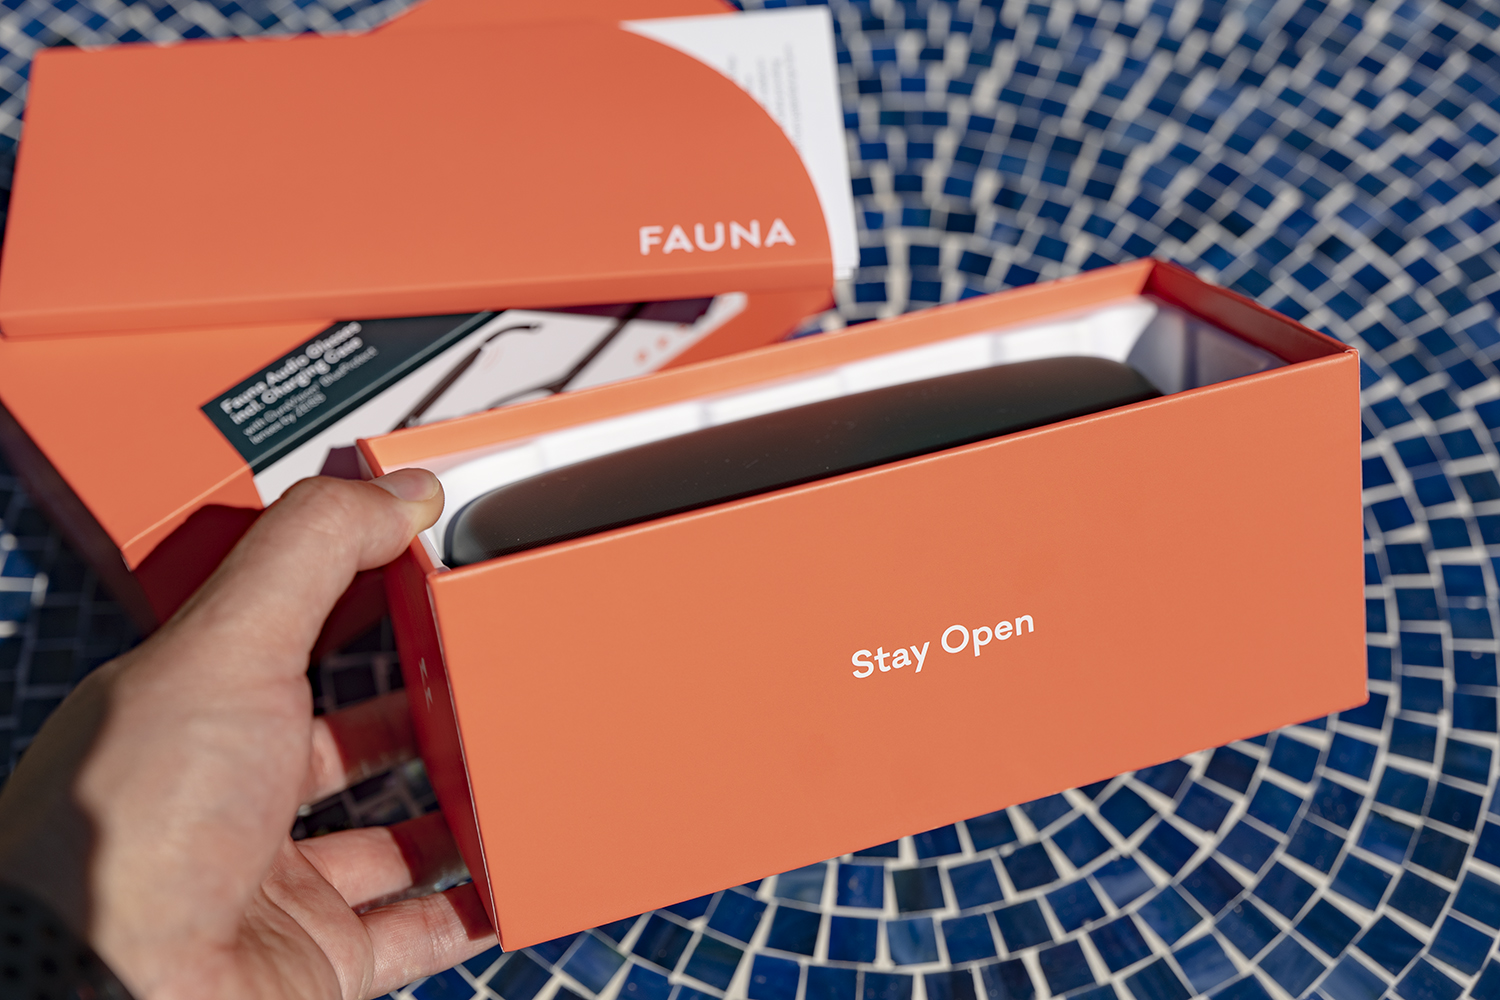 Fauna Audio Glasses Review: Don't Sound Great, Hard to Hate